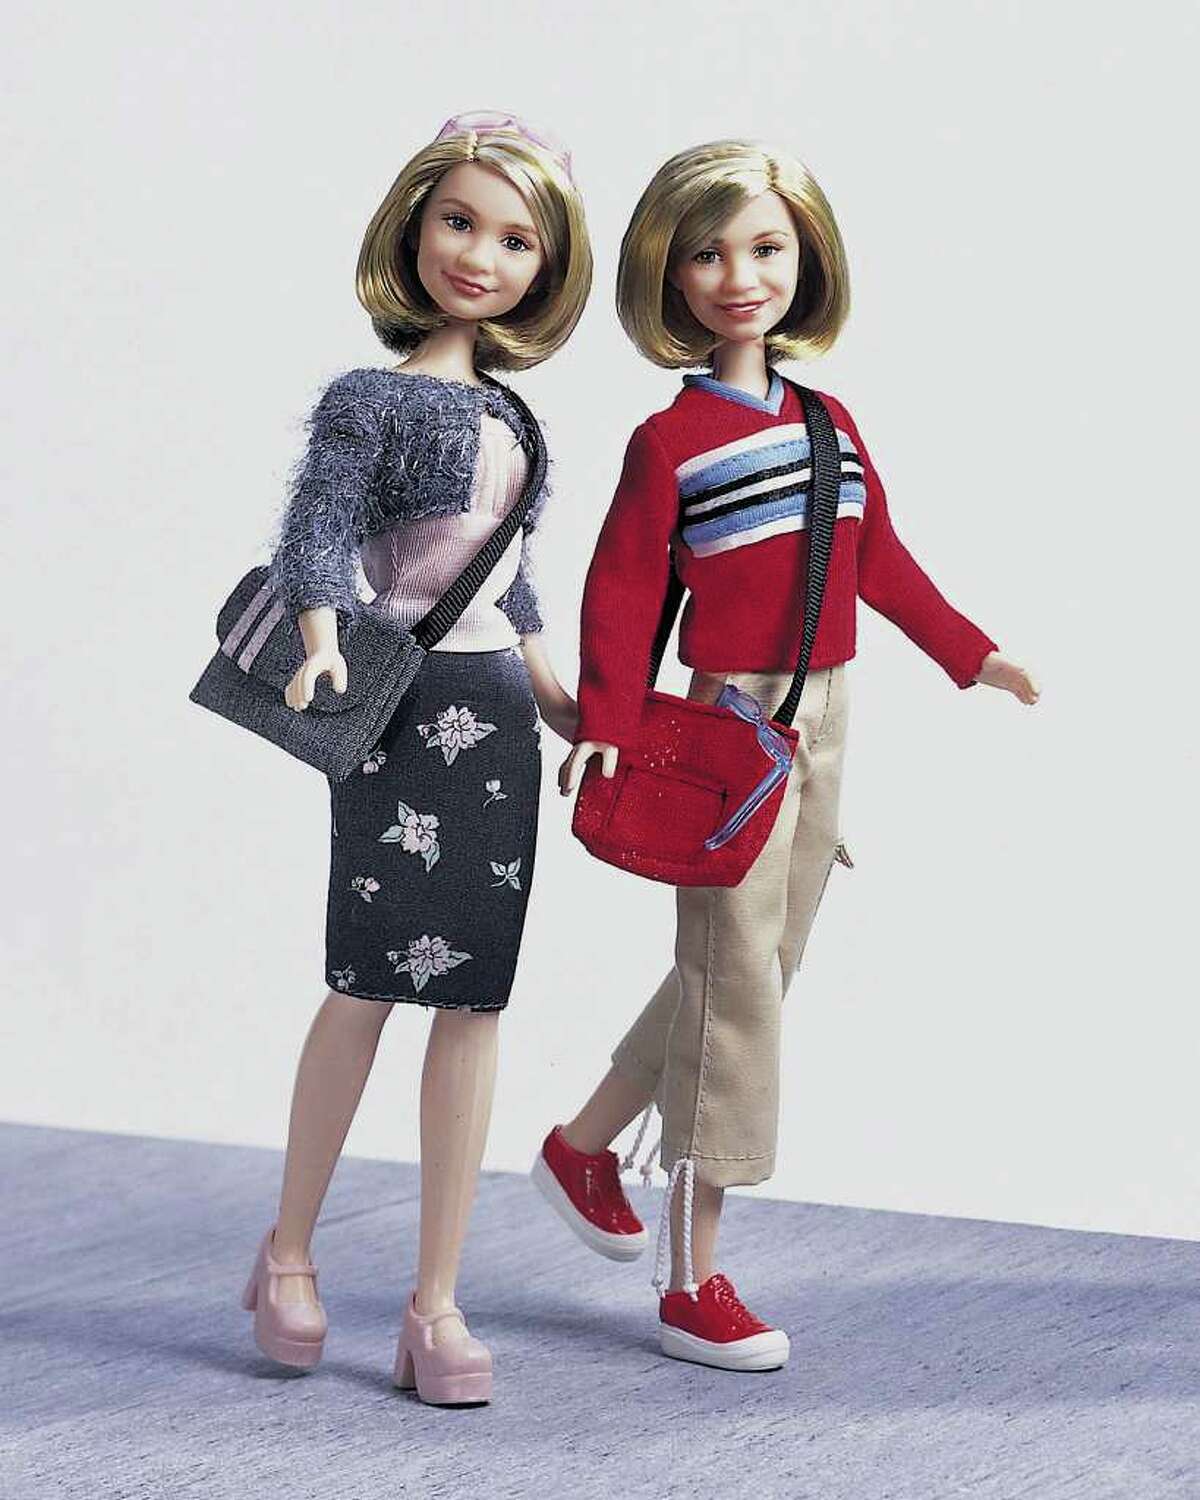 Mary-Kate and Ashley are represented on September 15, 2000 in a line of toy celebrity dolls by the toy company Mattel.